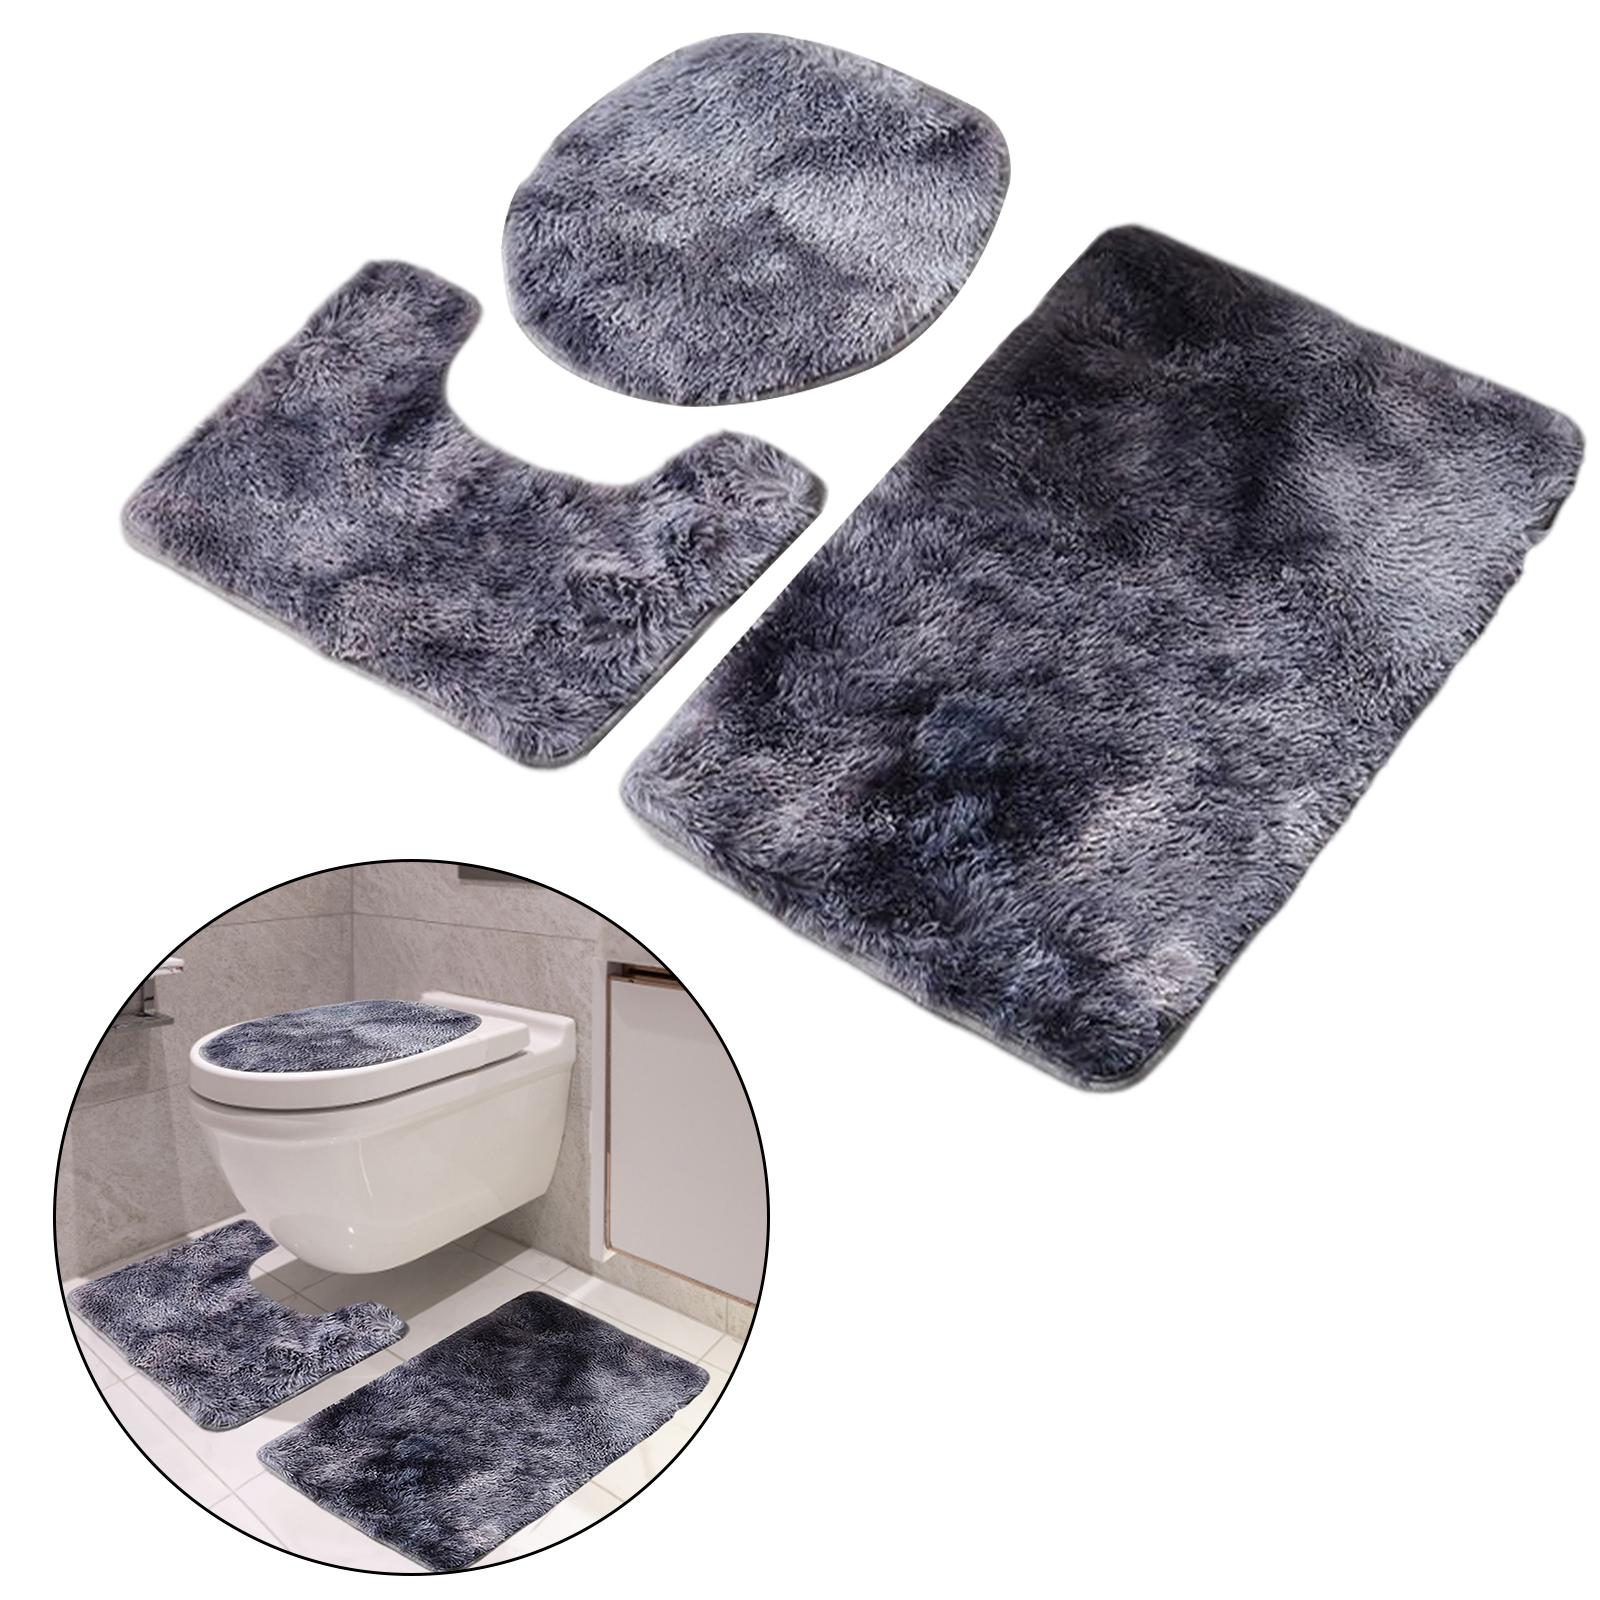 3x Bath Mats Set with Toilet Lid Cover Absorbent Large Carpet for Tub Gray